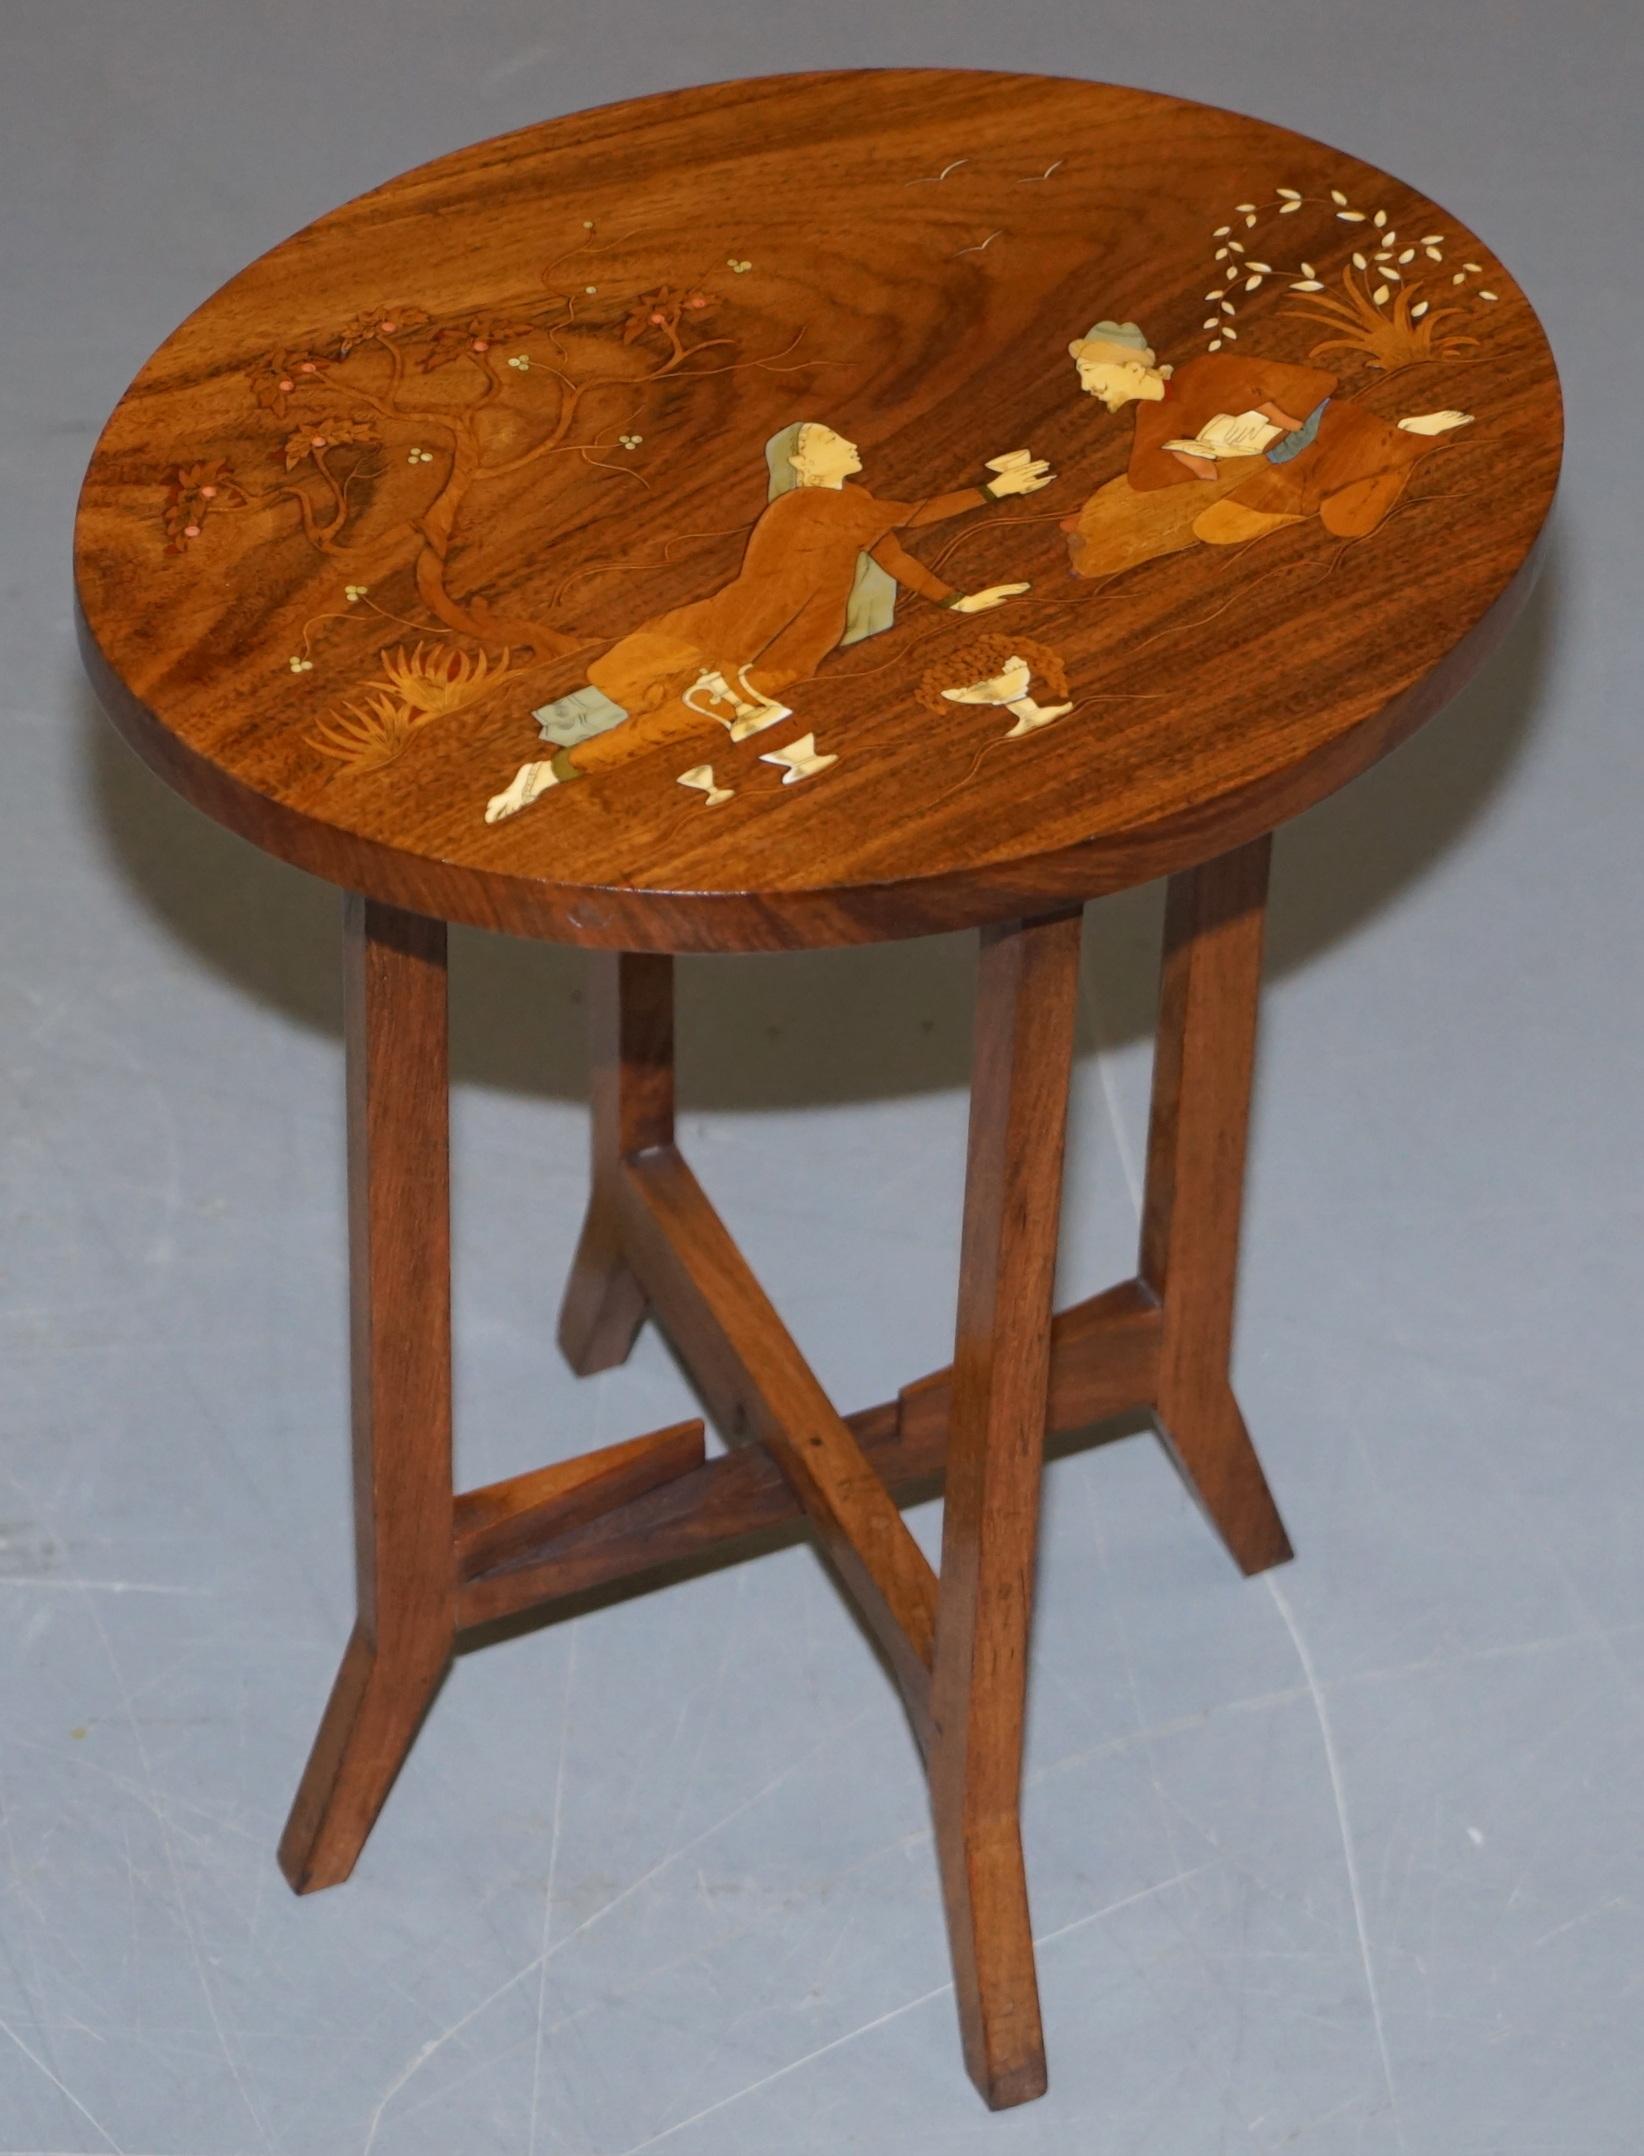 We are delighted to offer for sale this stunning fully restored Antique Japanese Shibayyama inlaid side table depicting romantic lovers

This table is sublime, absolutely exquisite from every angle, circa 1900, hand made in Japan

It has been